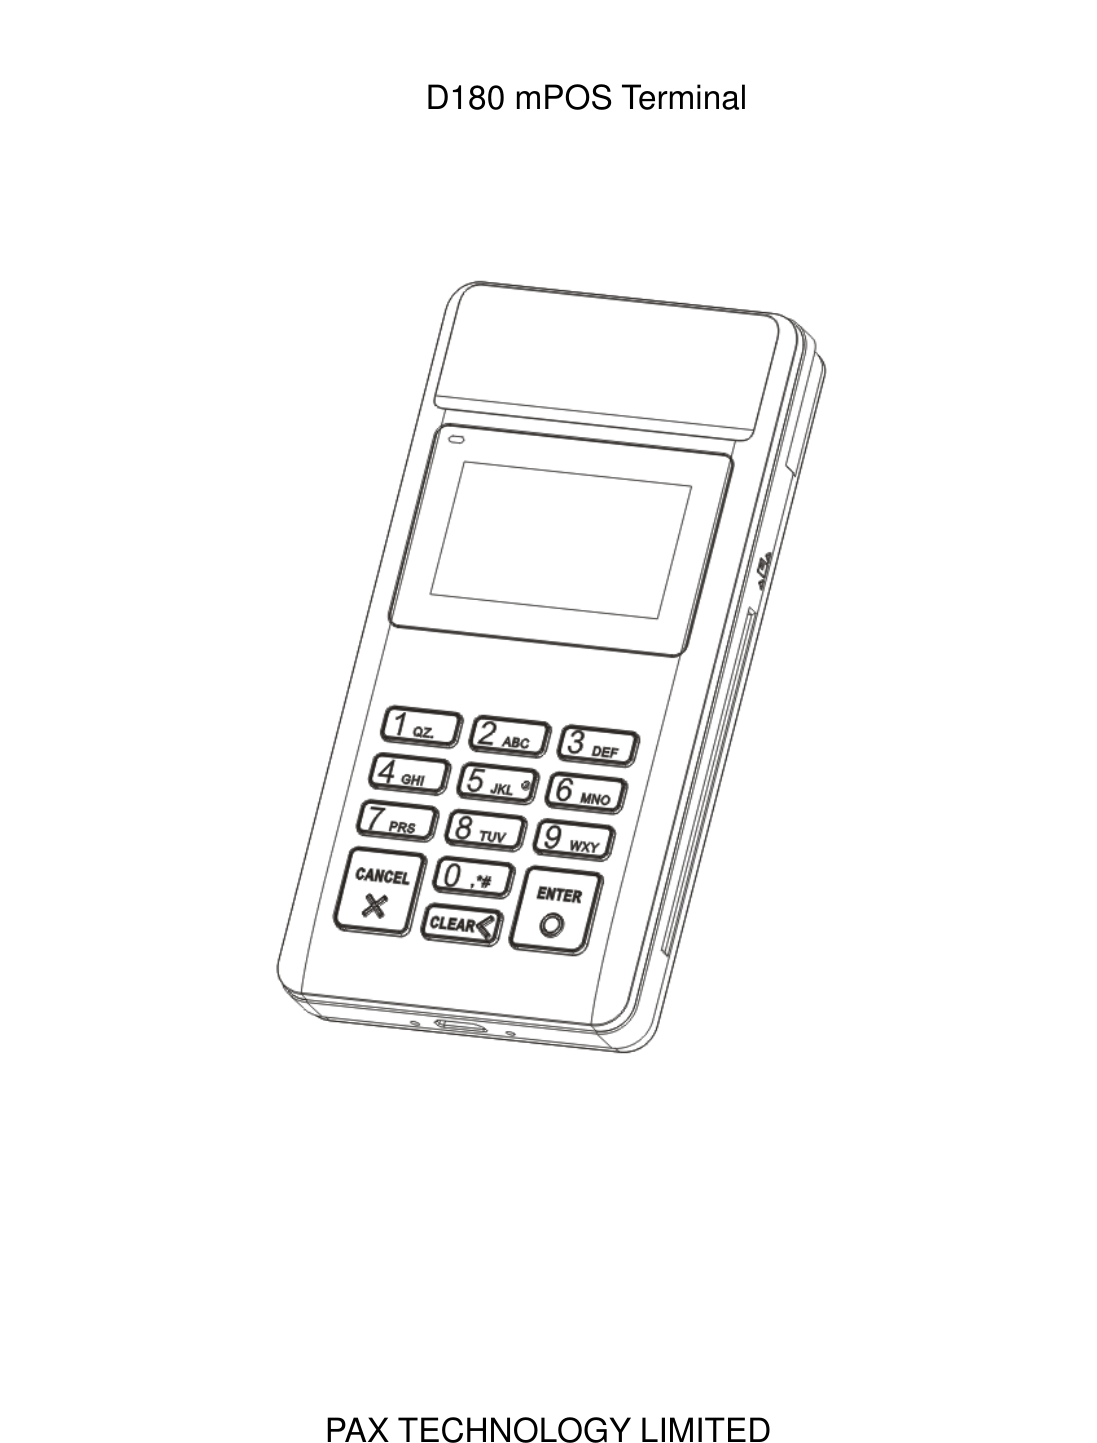  D180 mPOS Terminal         PAX TECHNOLOGY LIMITED  